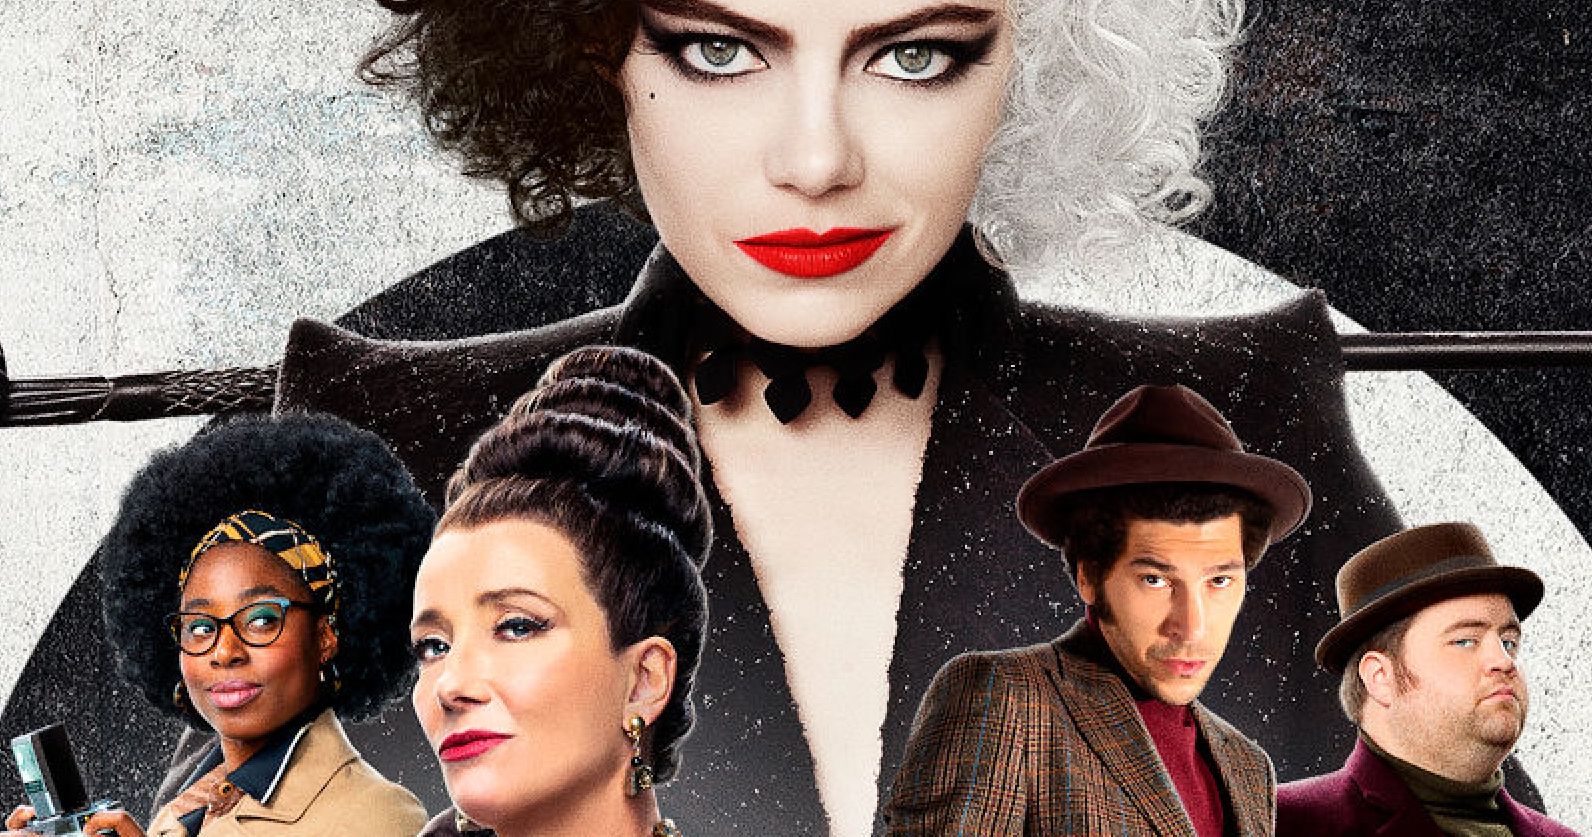 Cruella Is Now Streaming for Free on Disney+